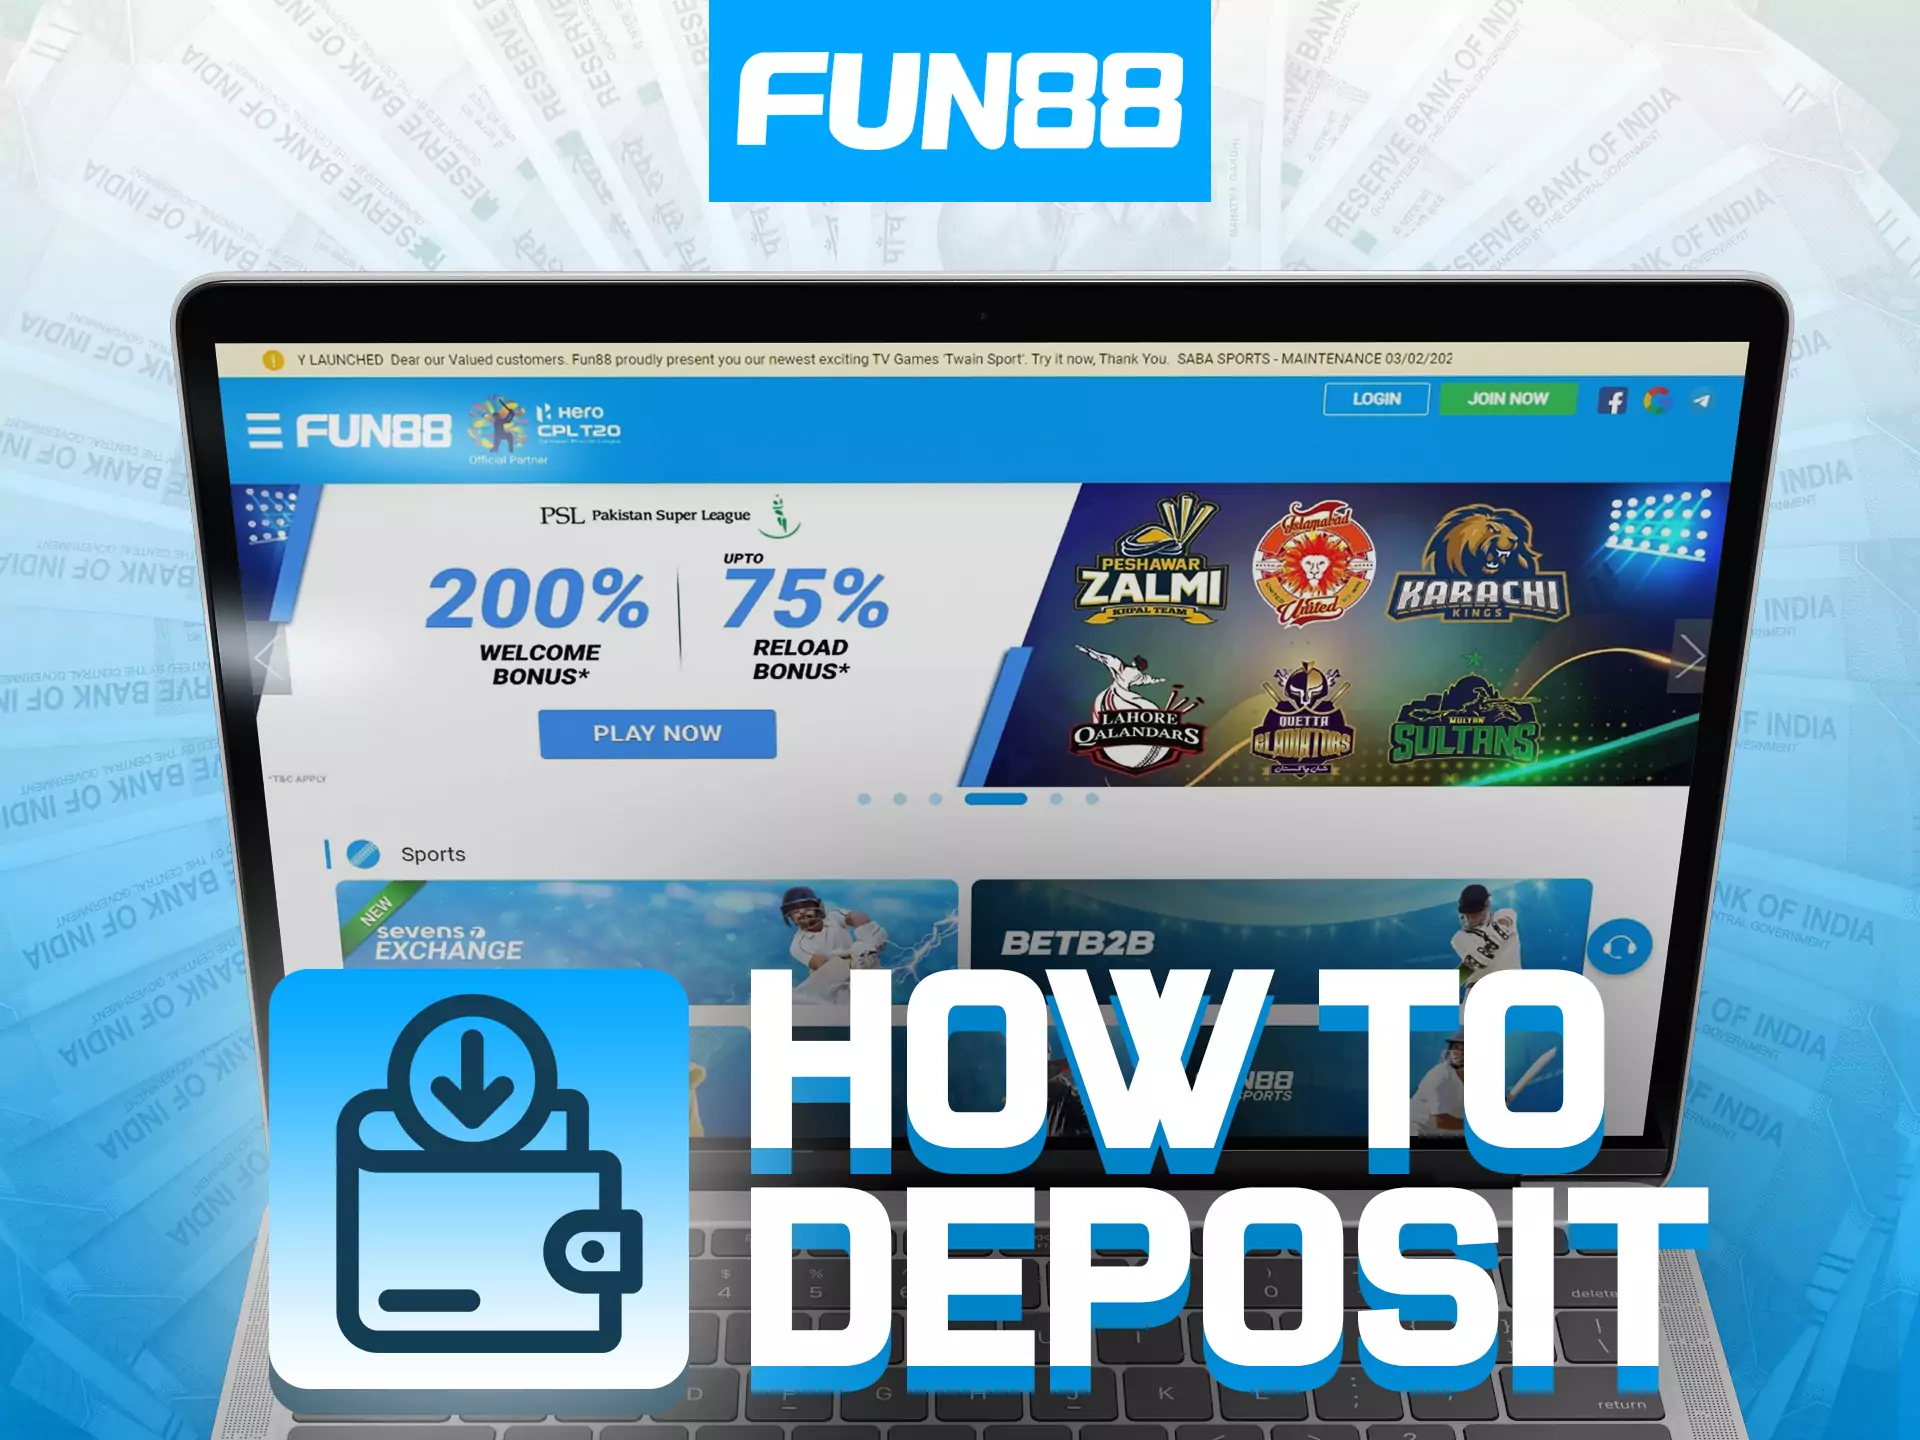 At Fun88 you can easily make a deposit and start betting.